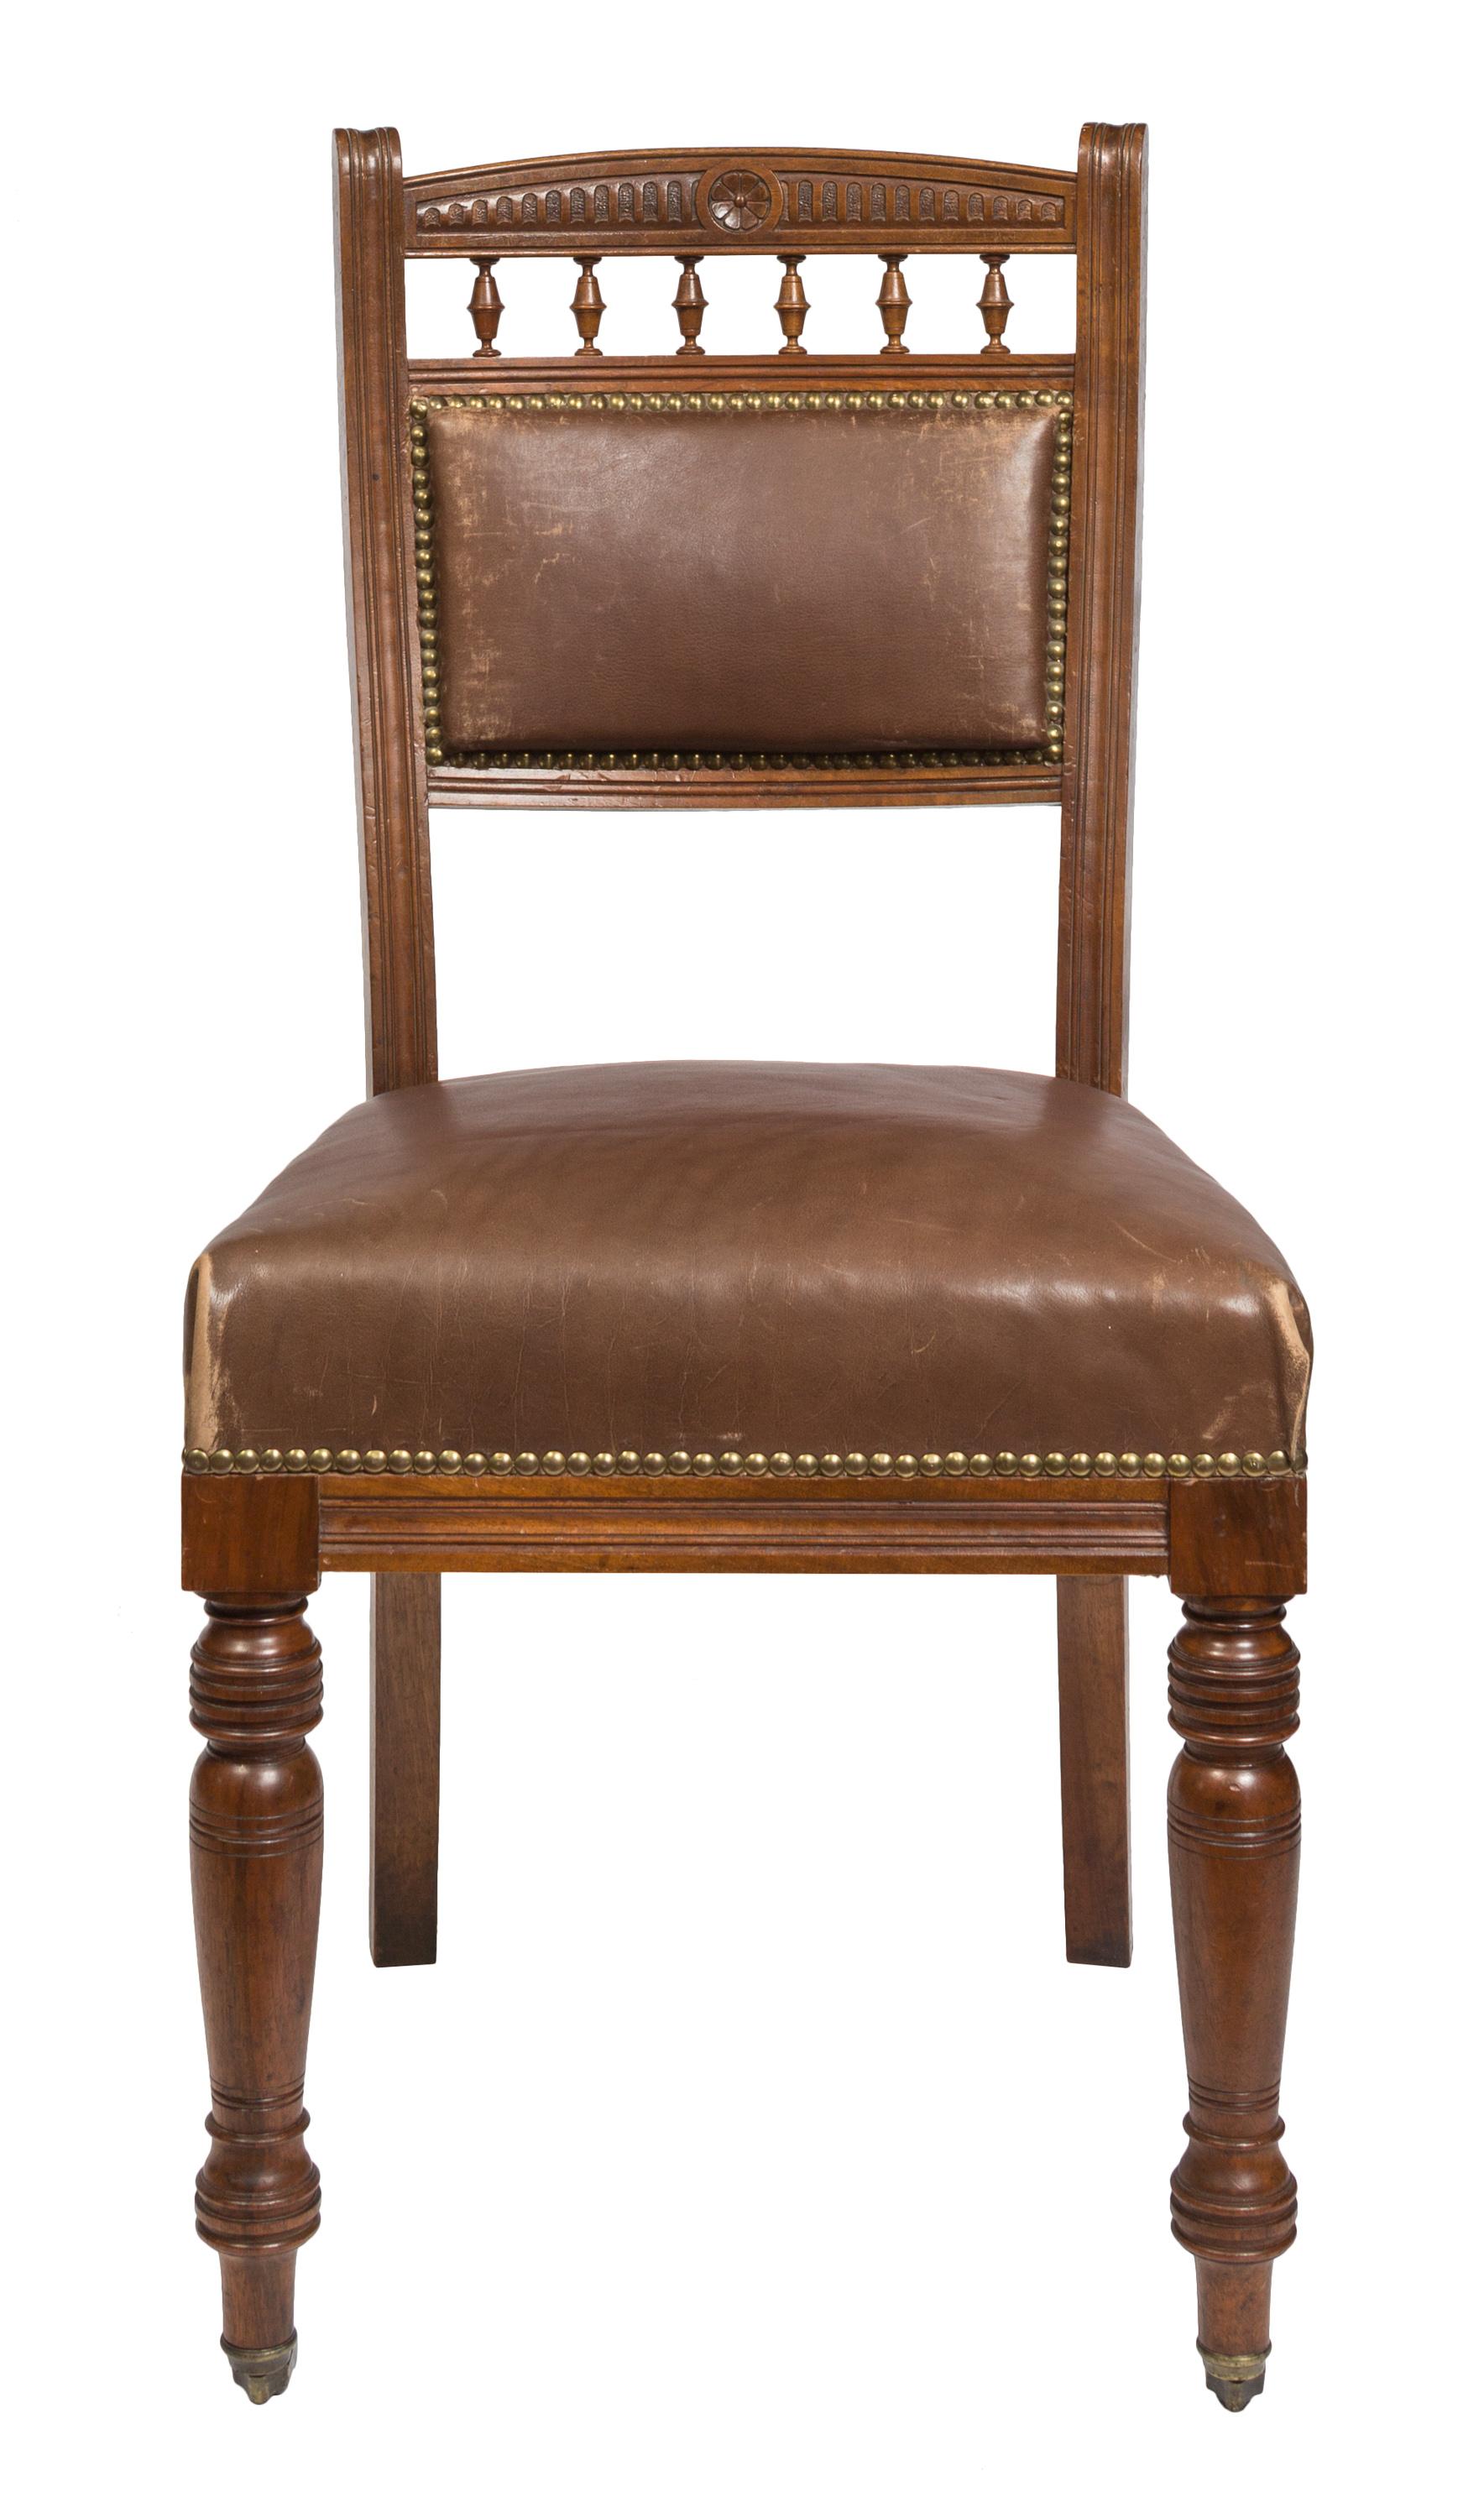 A charming pair of Victorian style dining (or boardroom) chairs, upholstered in a milk chocolate brown leather with decorative nail head trim and nicely carved detailing in the chair back. The front legs have casters for ease of movement, and both